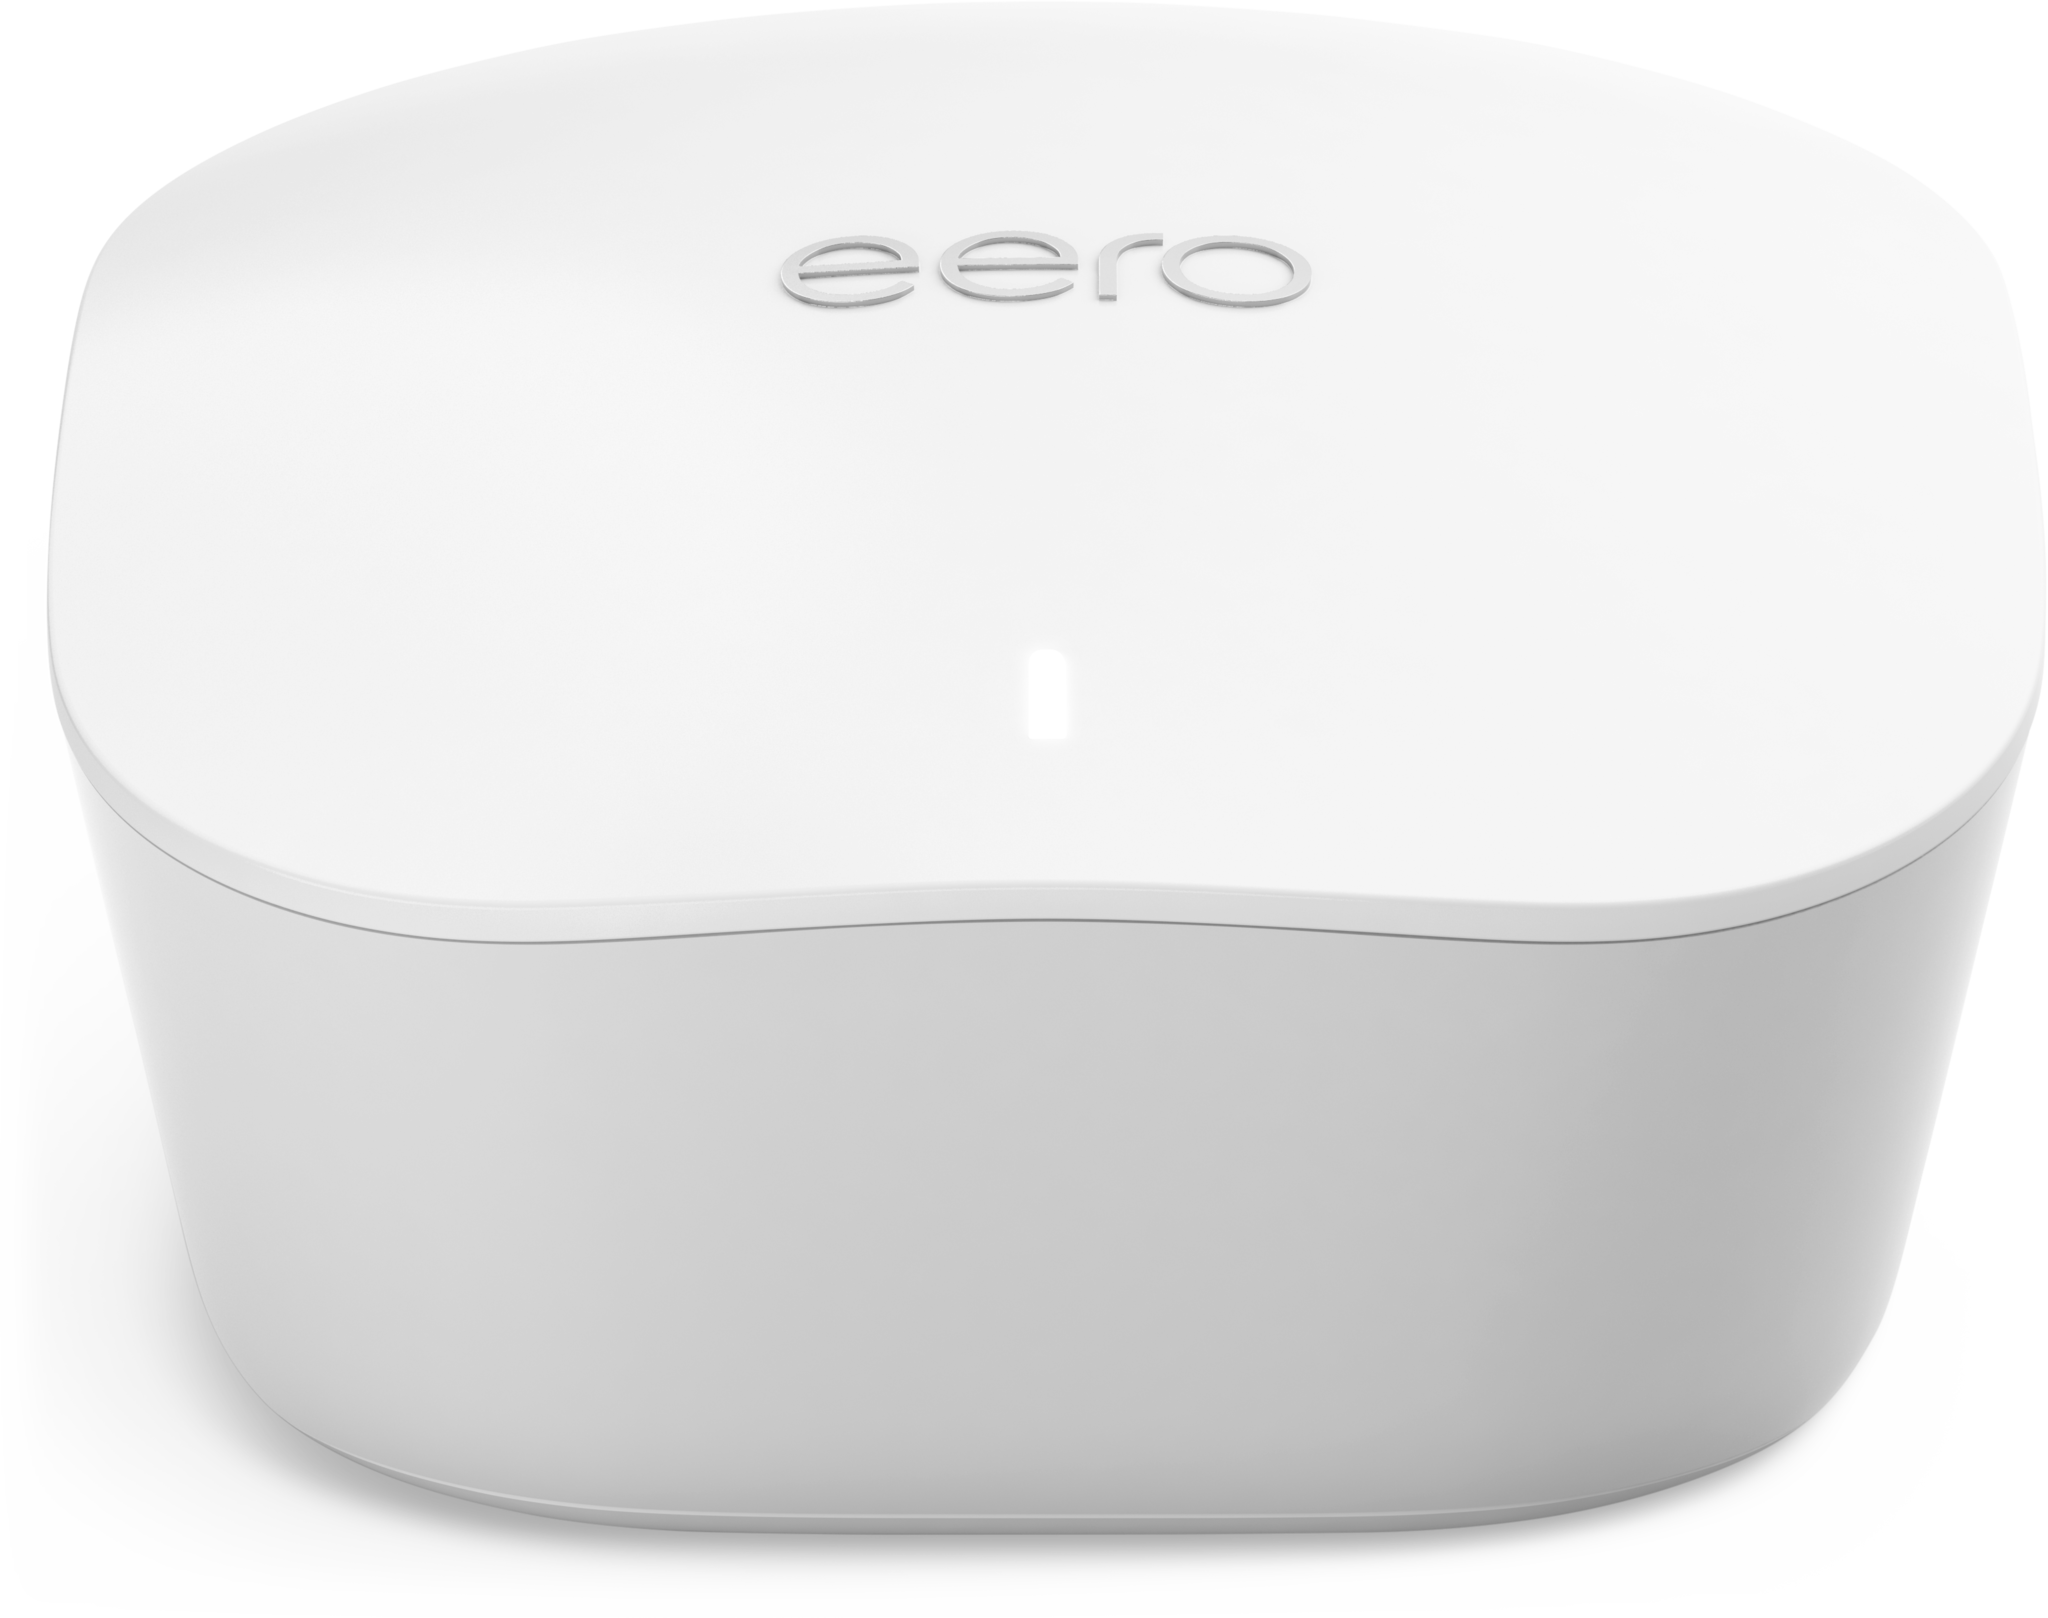 Eero Mesh vs Eero Pro: What are the differences and which should you buy?